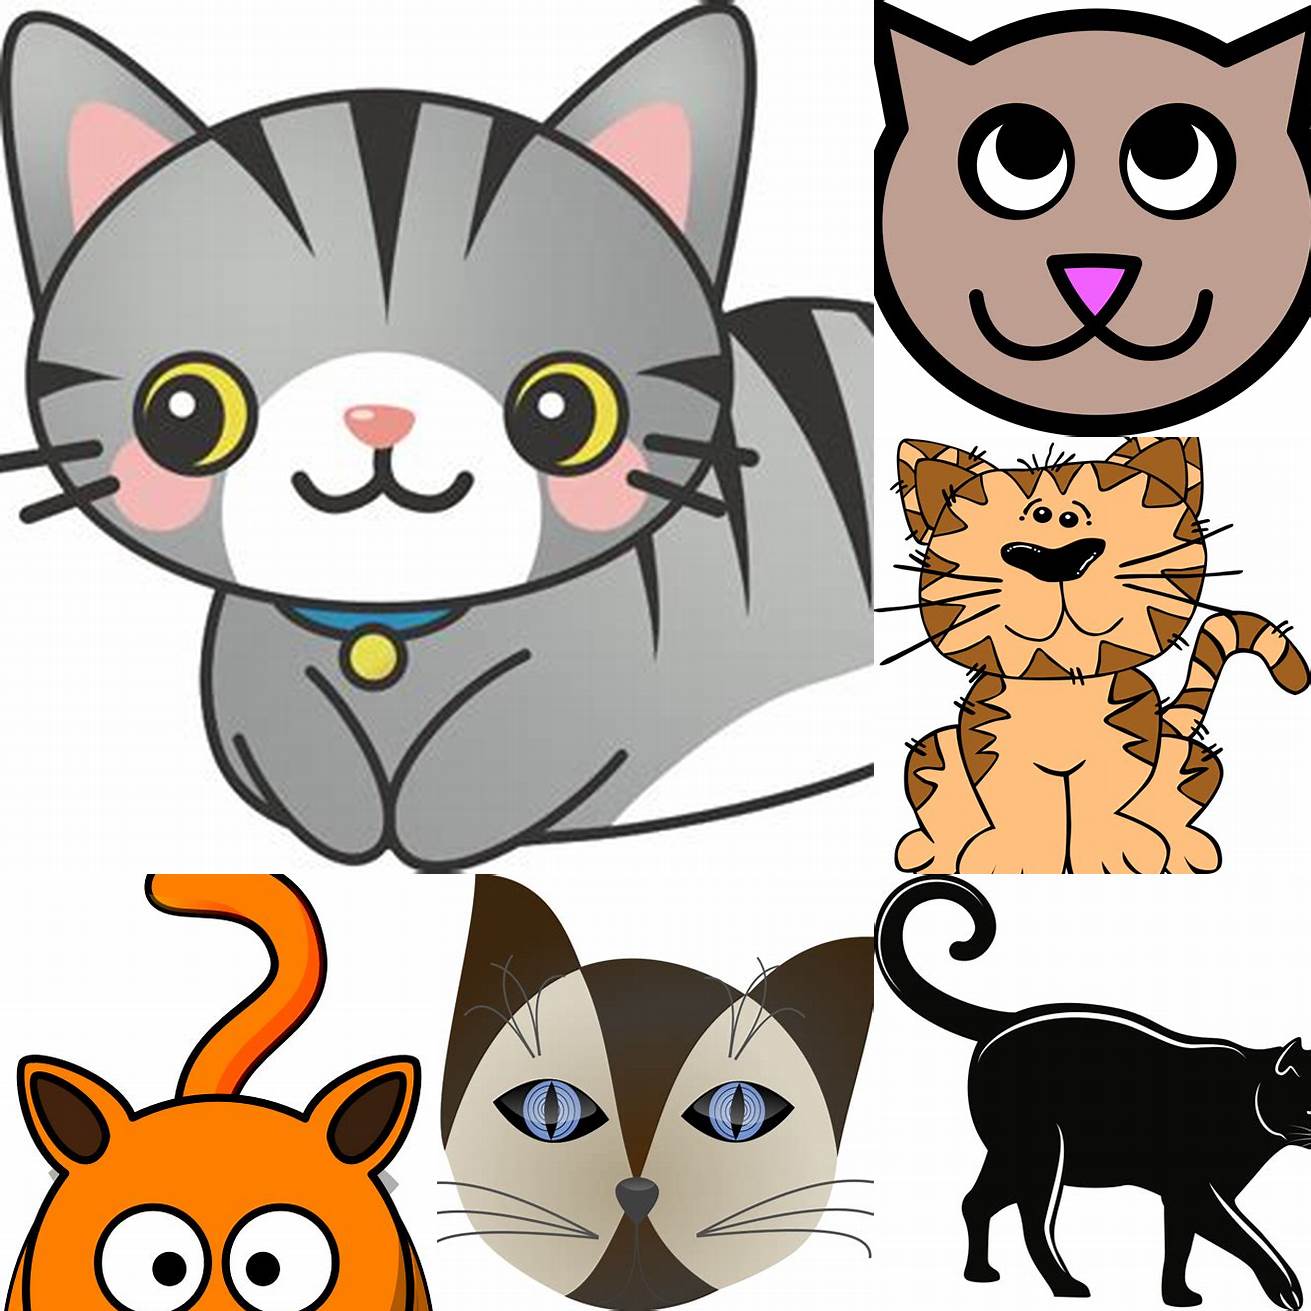 2 Openclipart